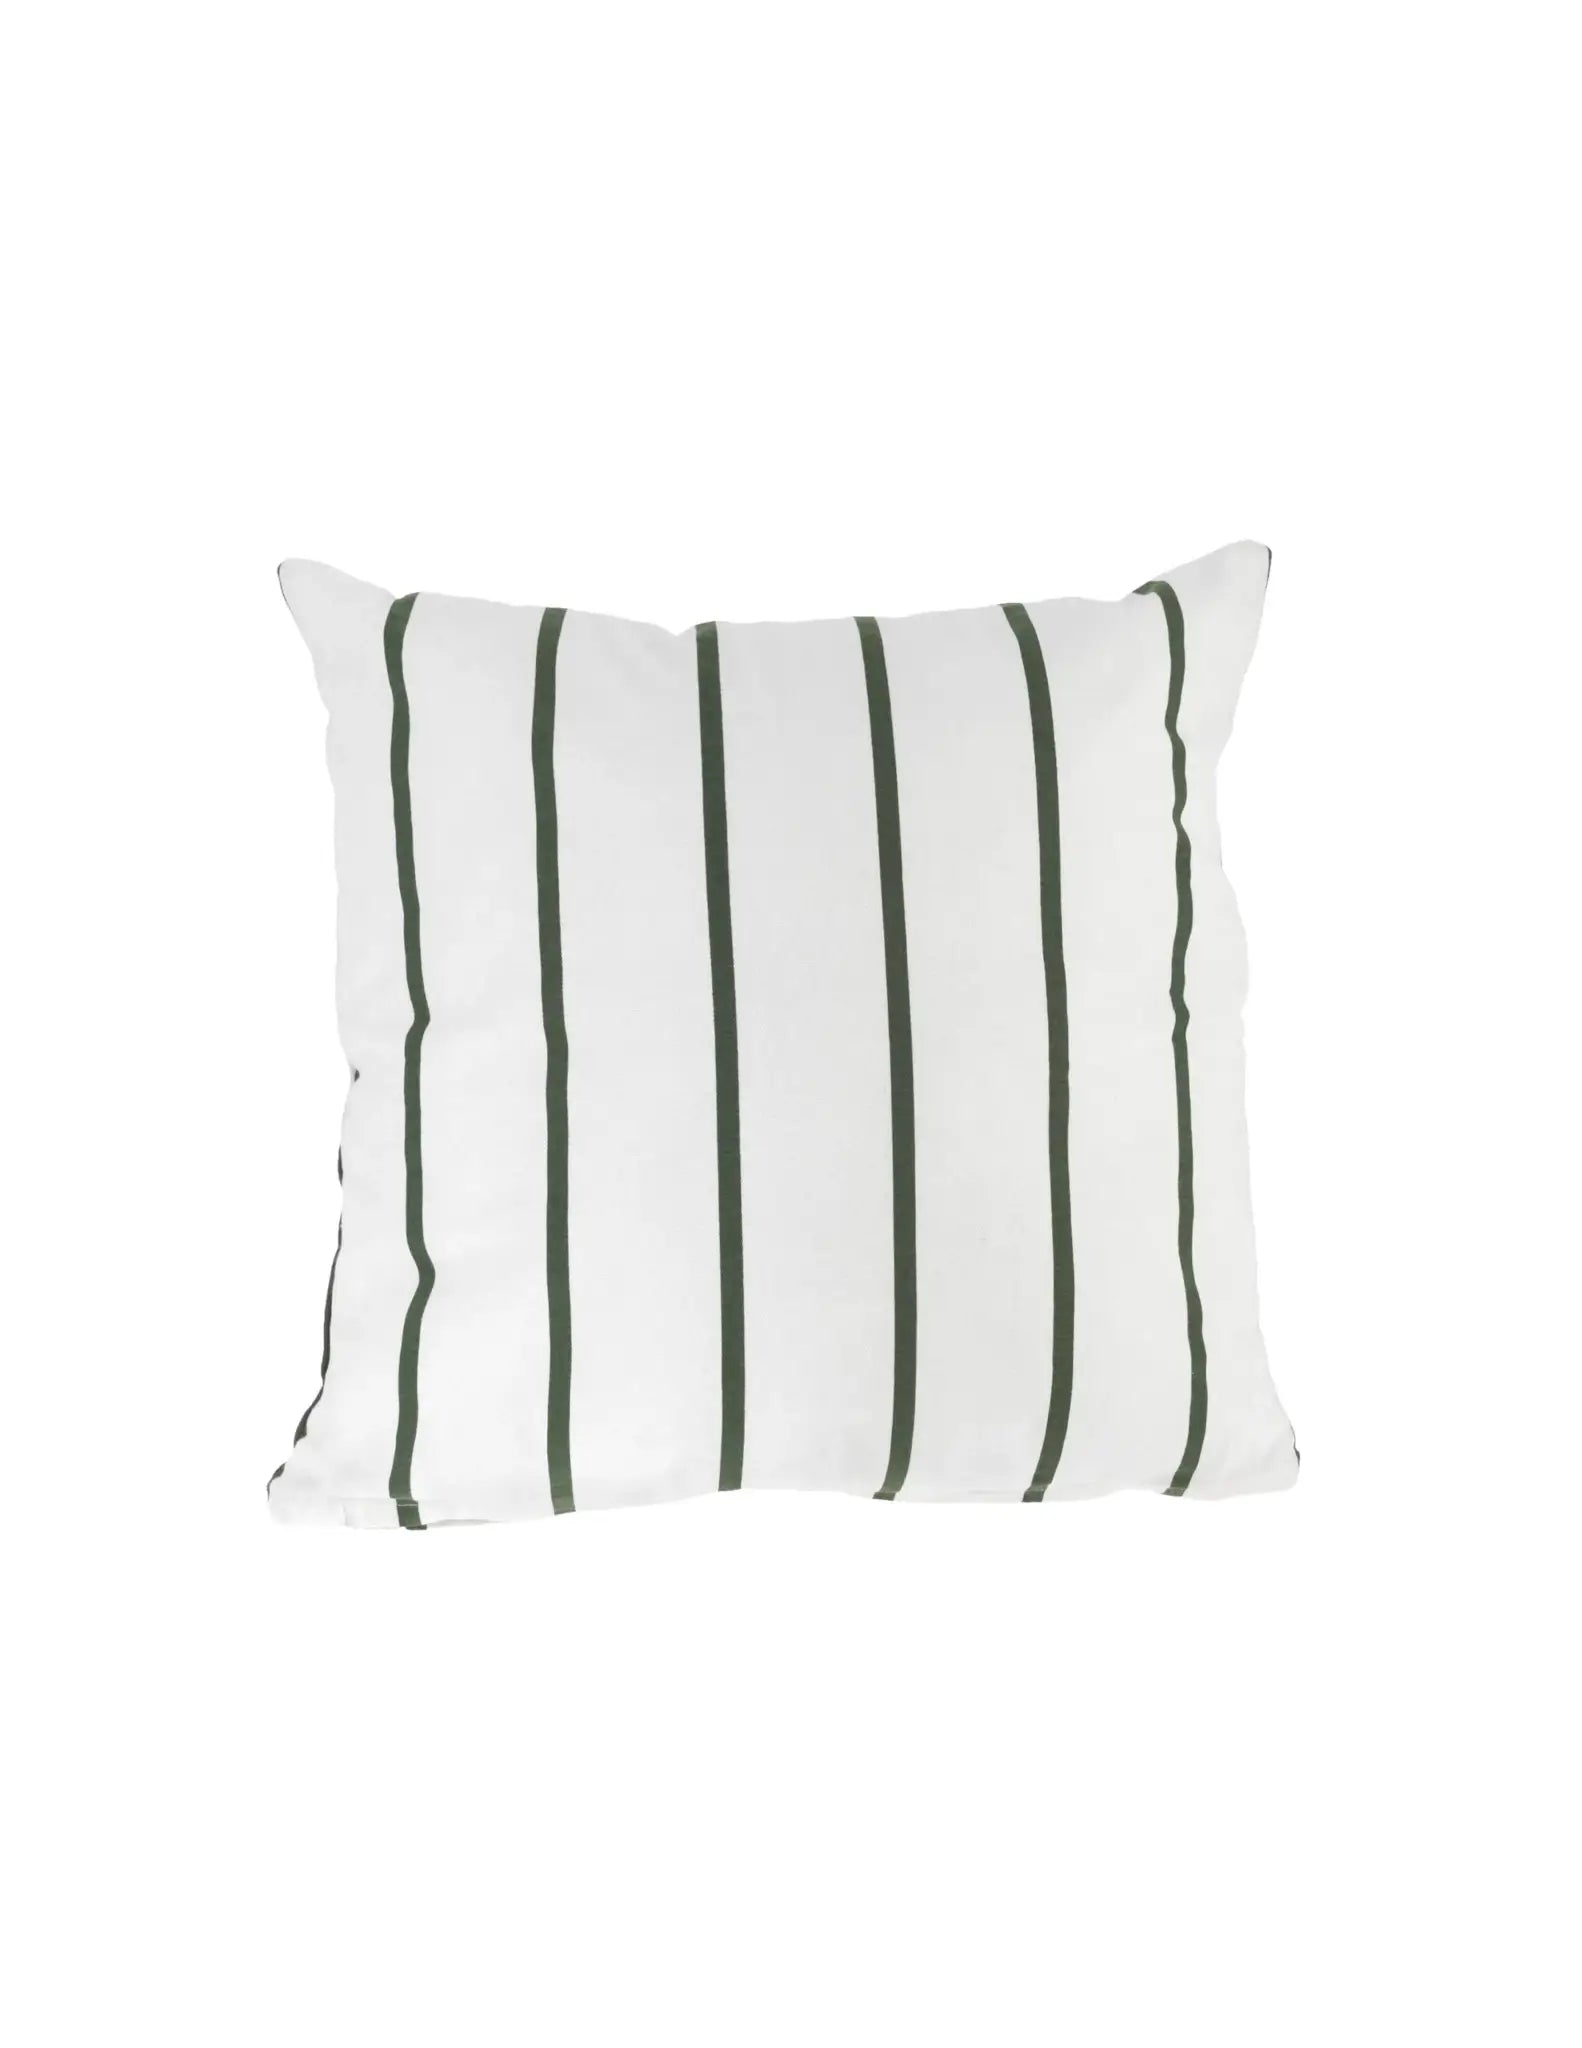 Karlstorp Striped Cushion | Cotton & Feather | by Storefactory - Lifestory